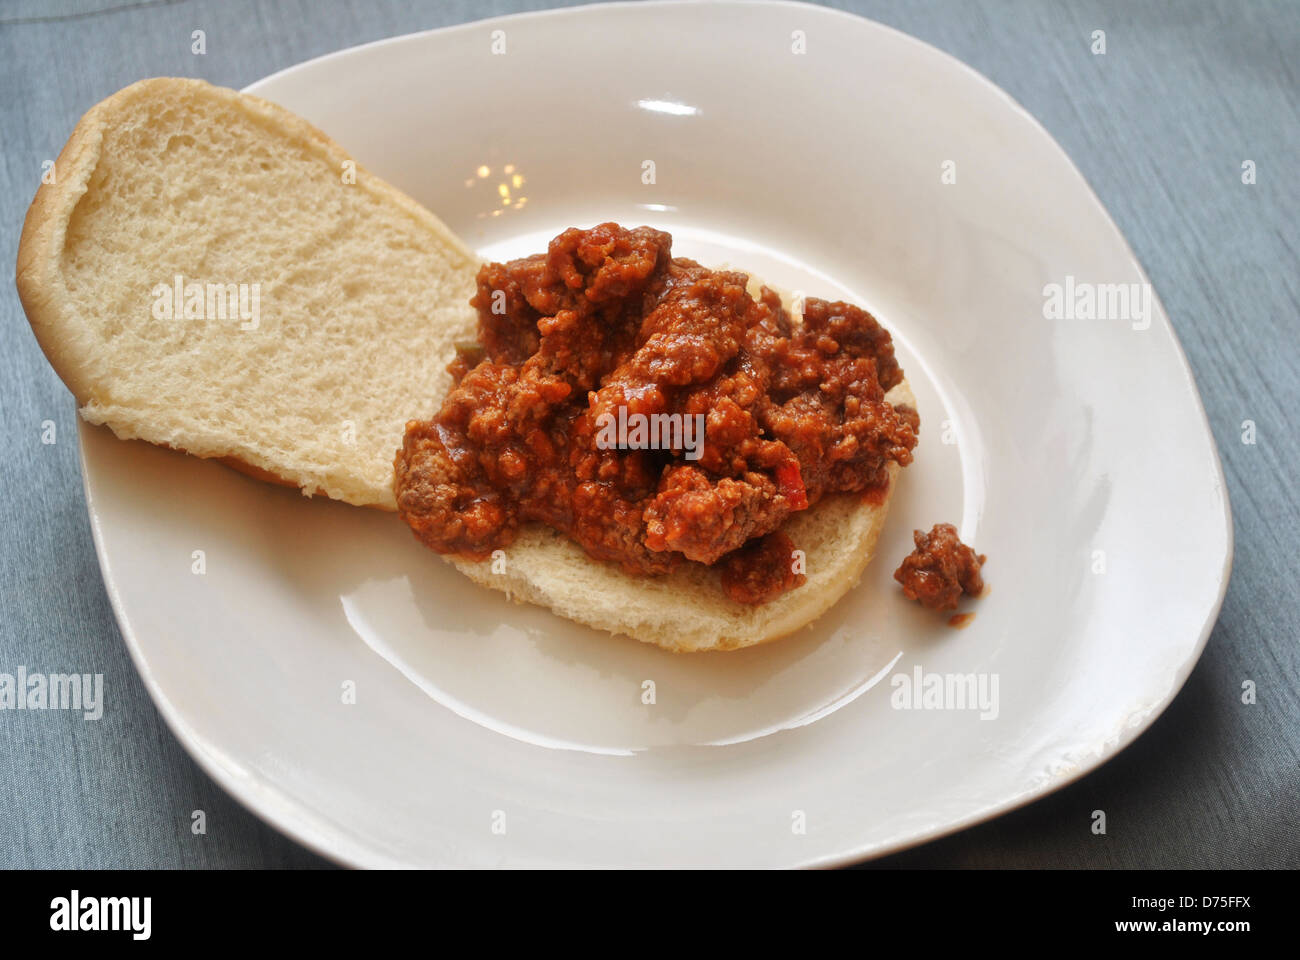 A Messy Sloppy Joe Served for Lunch Stock Photo